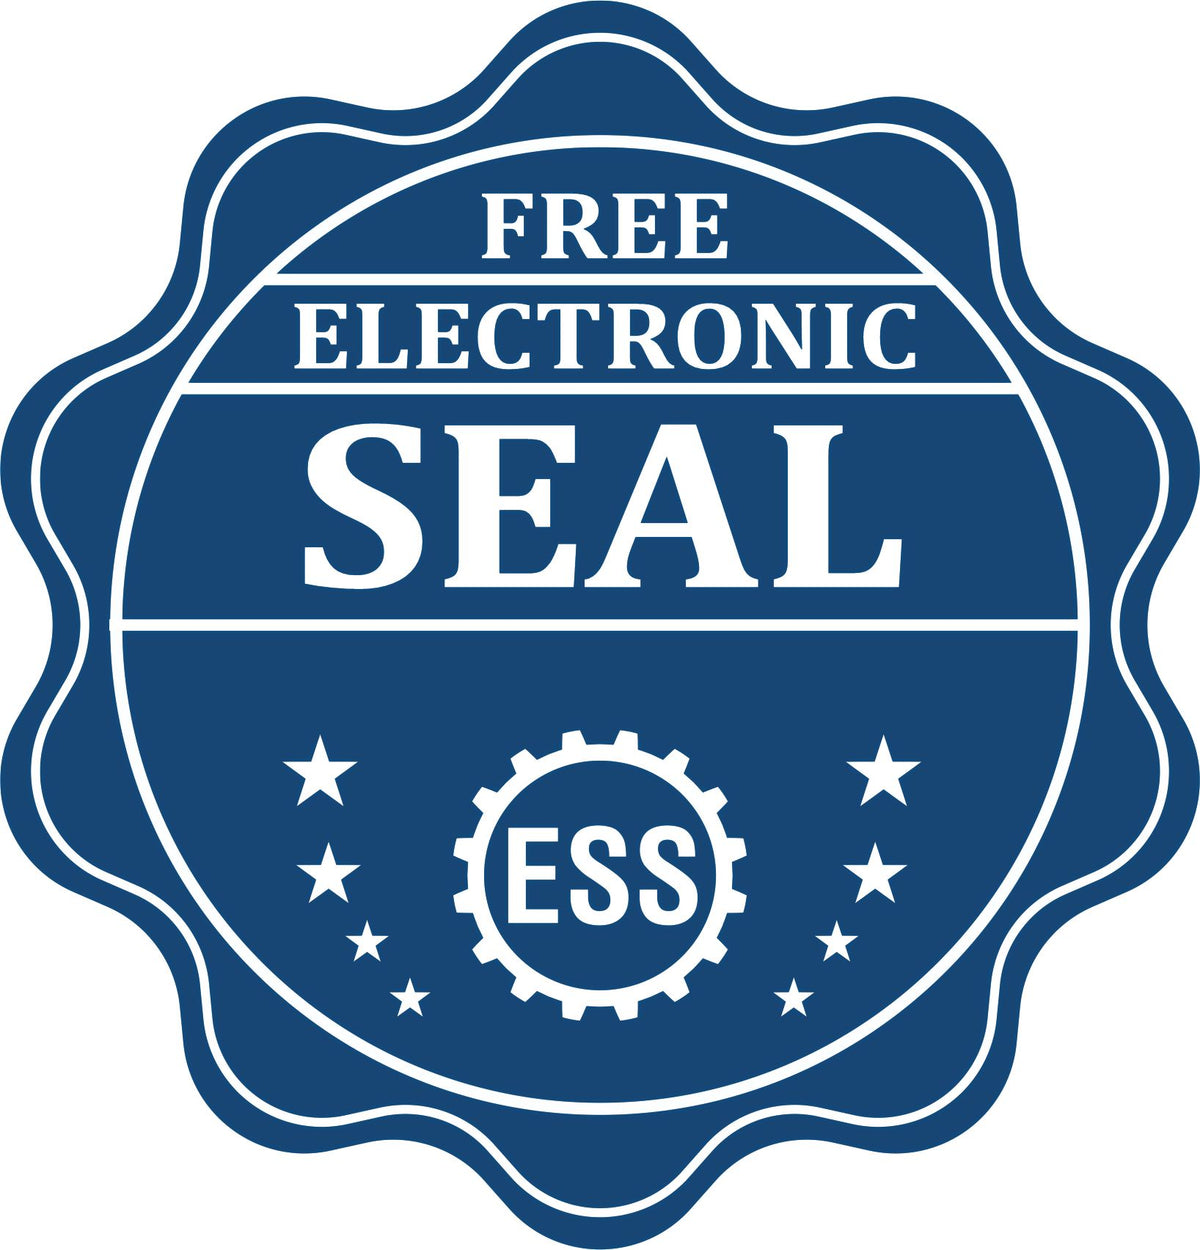 A badge showing a free electronic seal for the Gift Alaska Geologist Seal with stars and the ESS gear on the emblem.